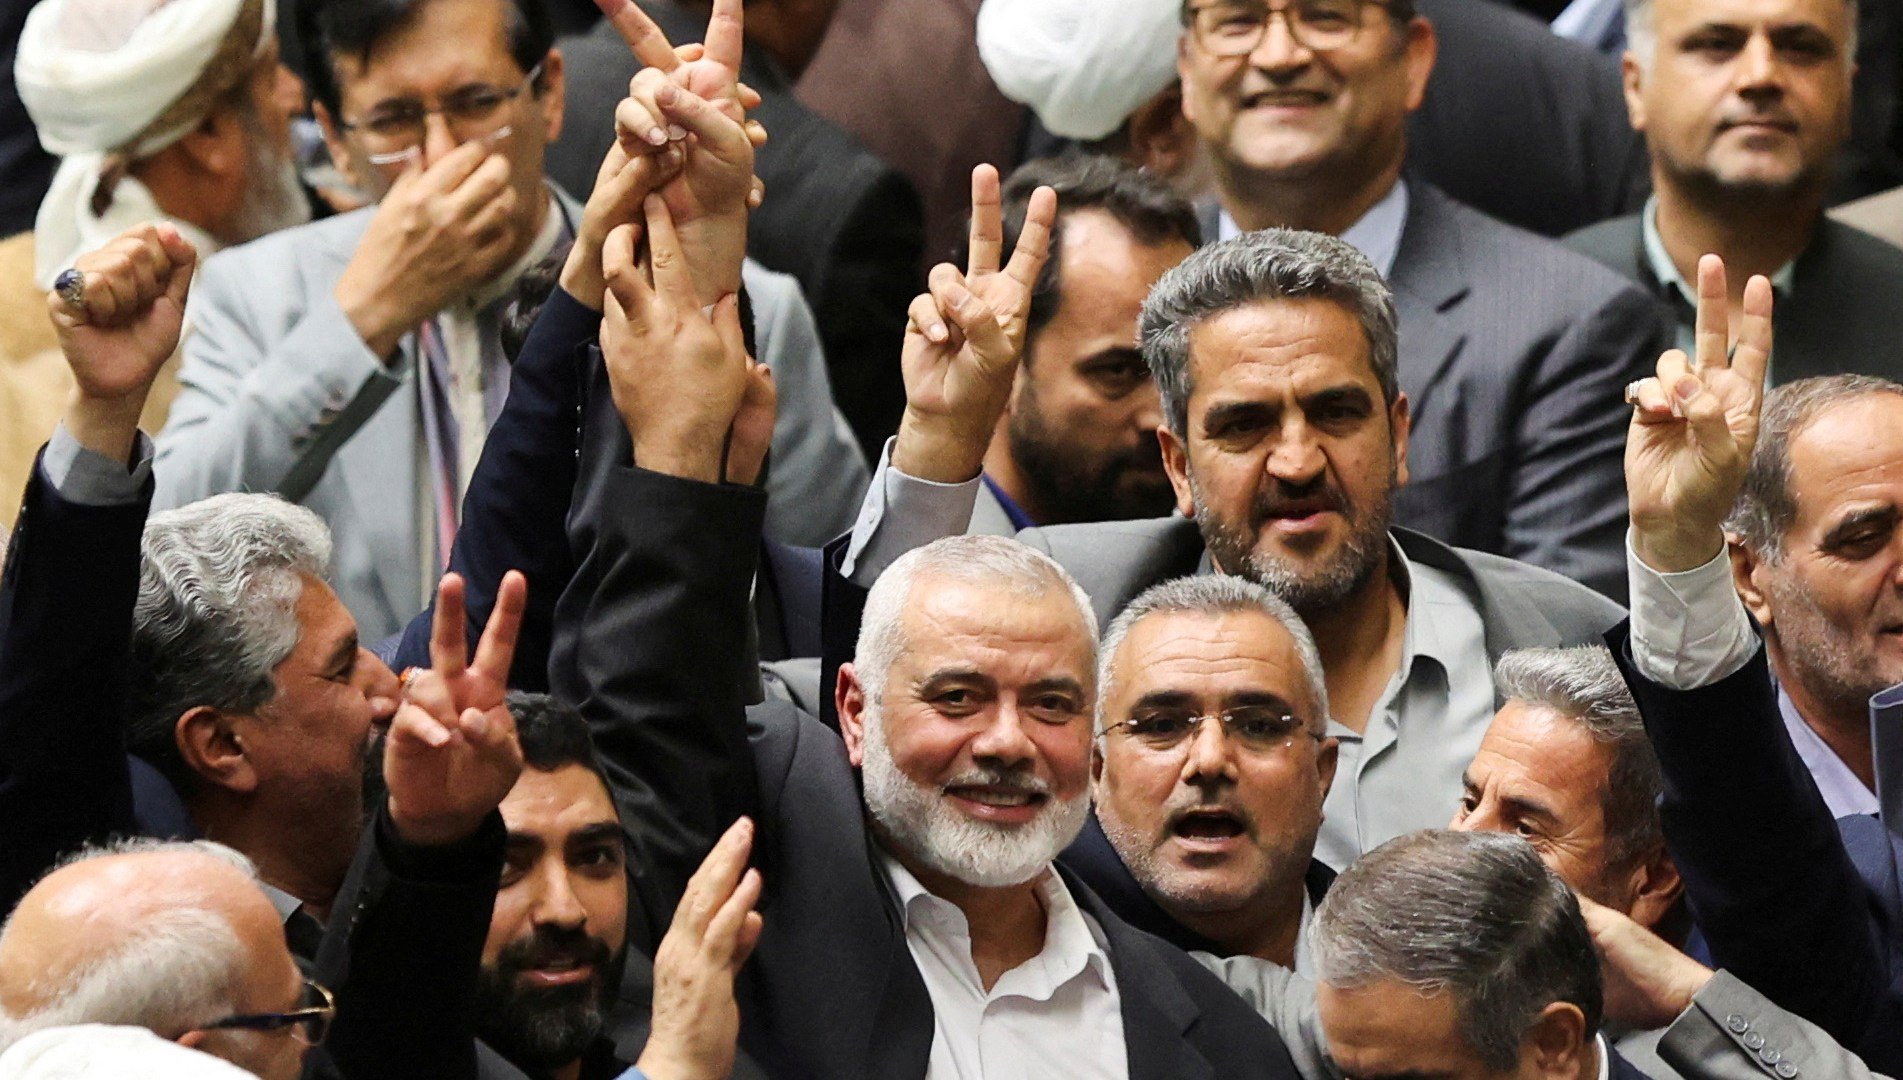 What the Ismail Haniyeh assassination means for Gaza ceasefire talks